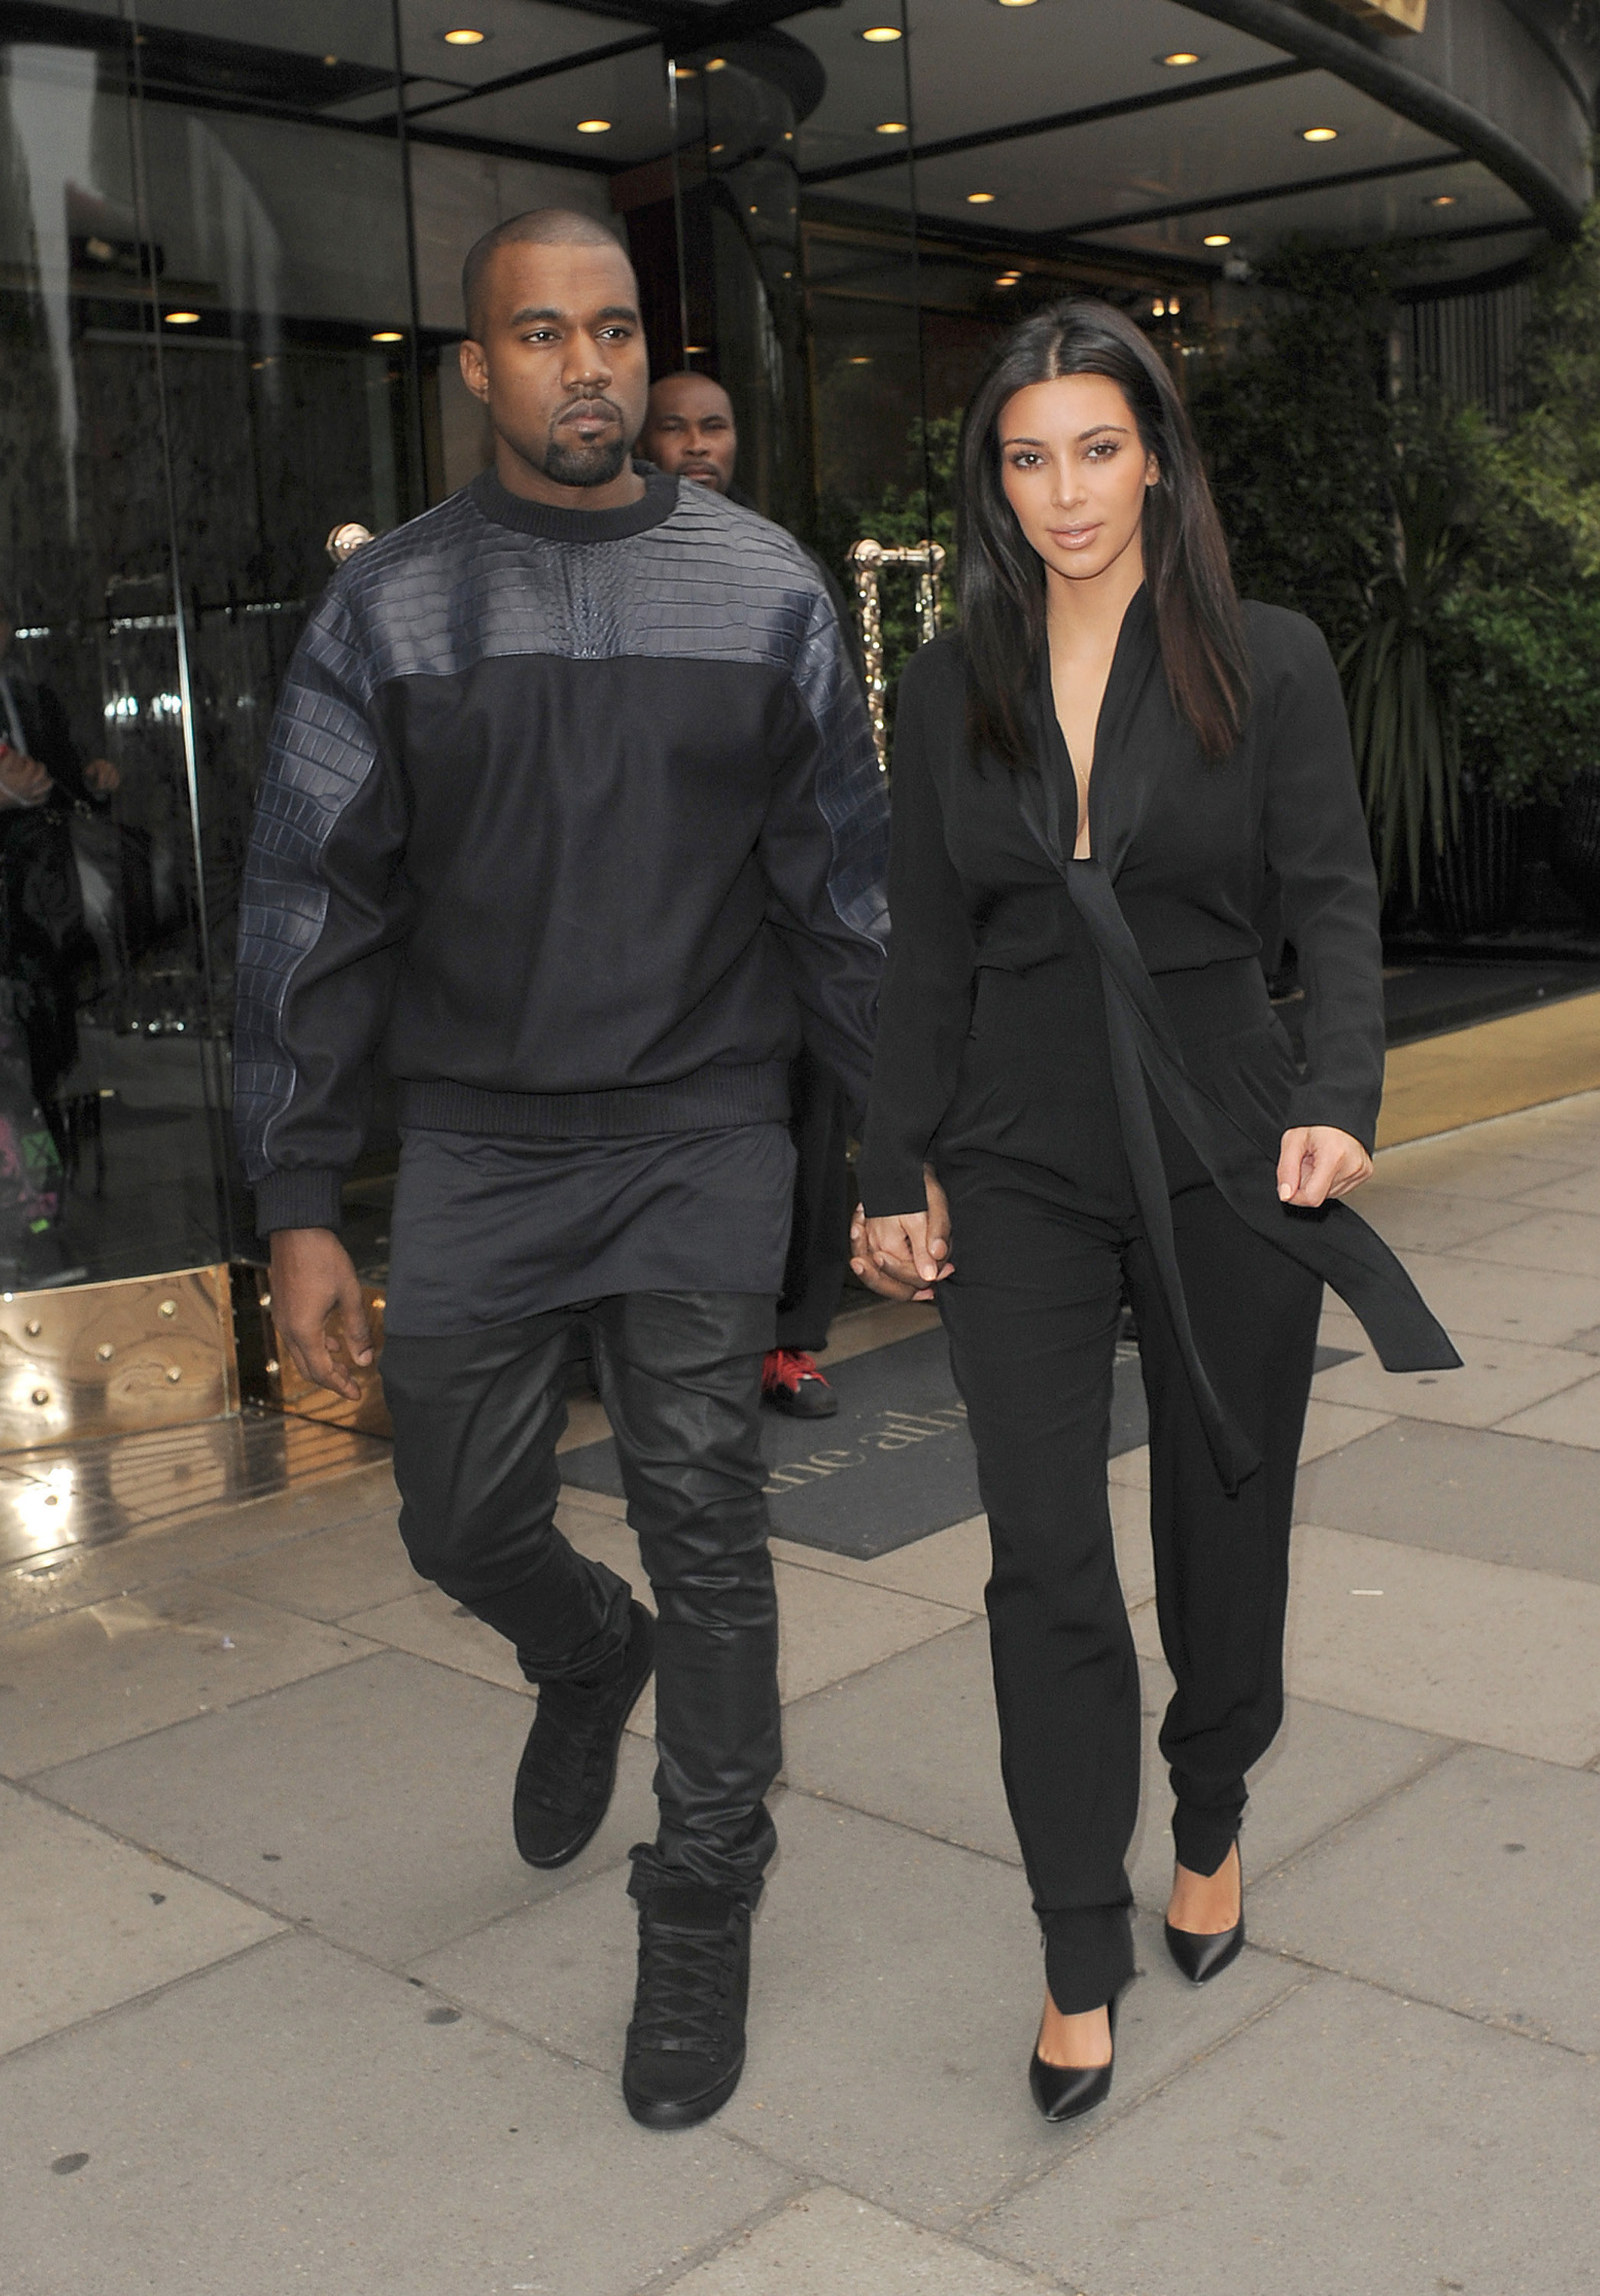 Kim and Kanye holding hands walking down the street